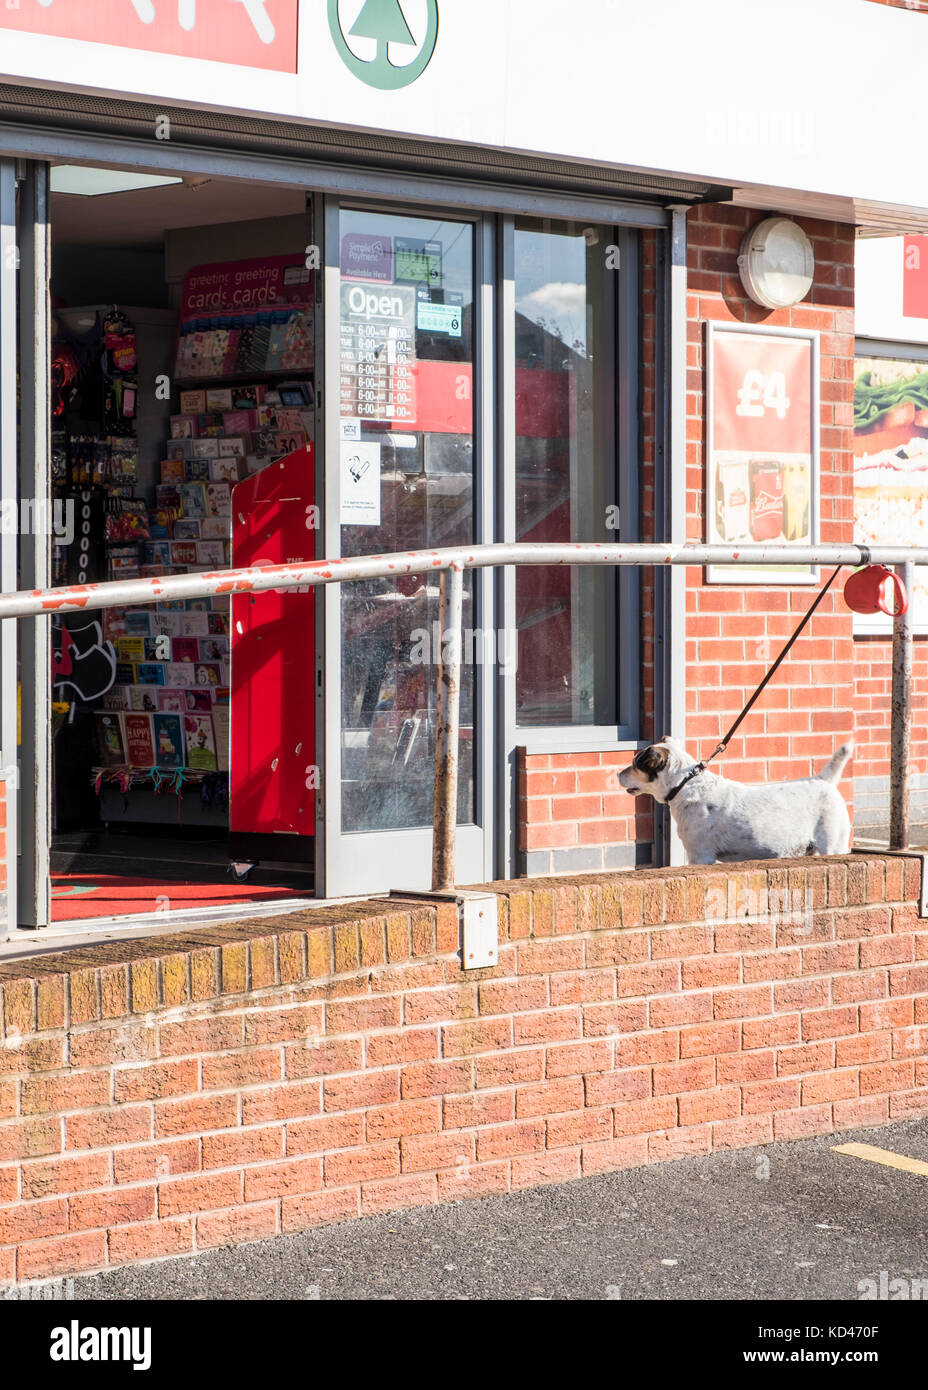 Dog on a lead tied to a railing waiting for its owner outside a shop, Nottinghamshire, England, UK Stock Photo